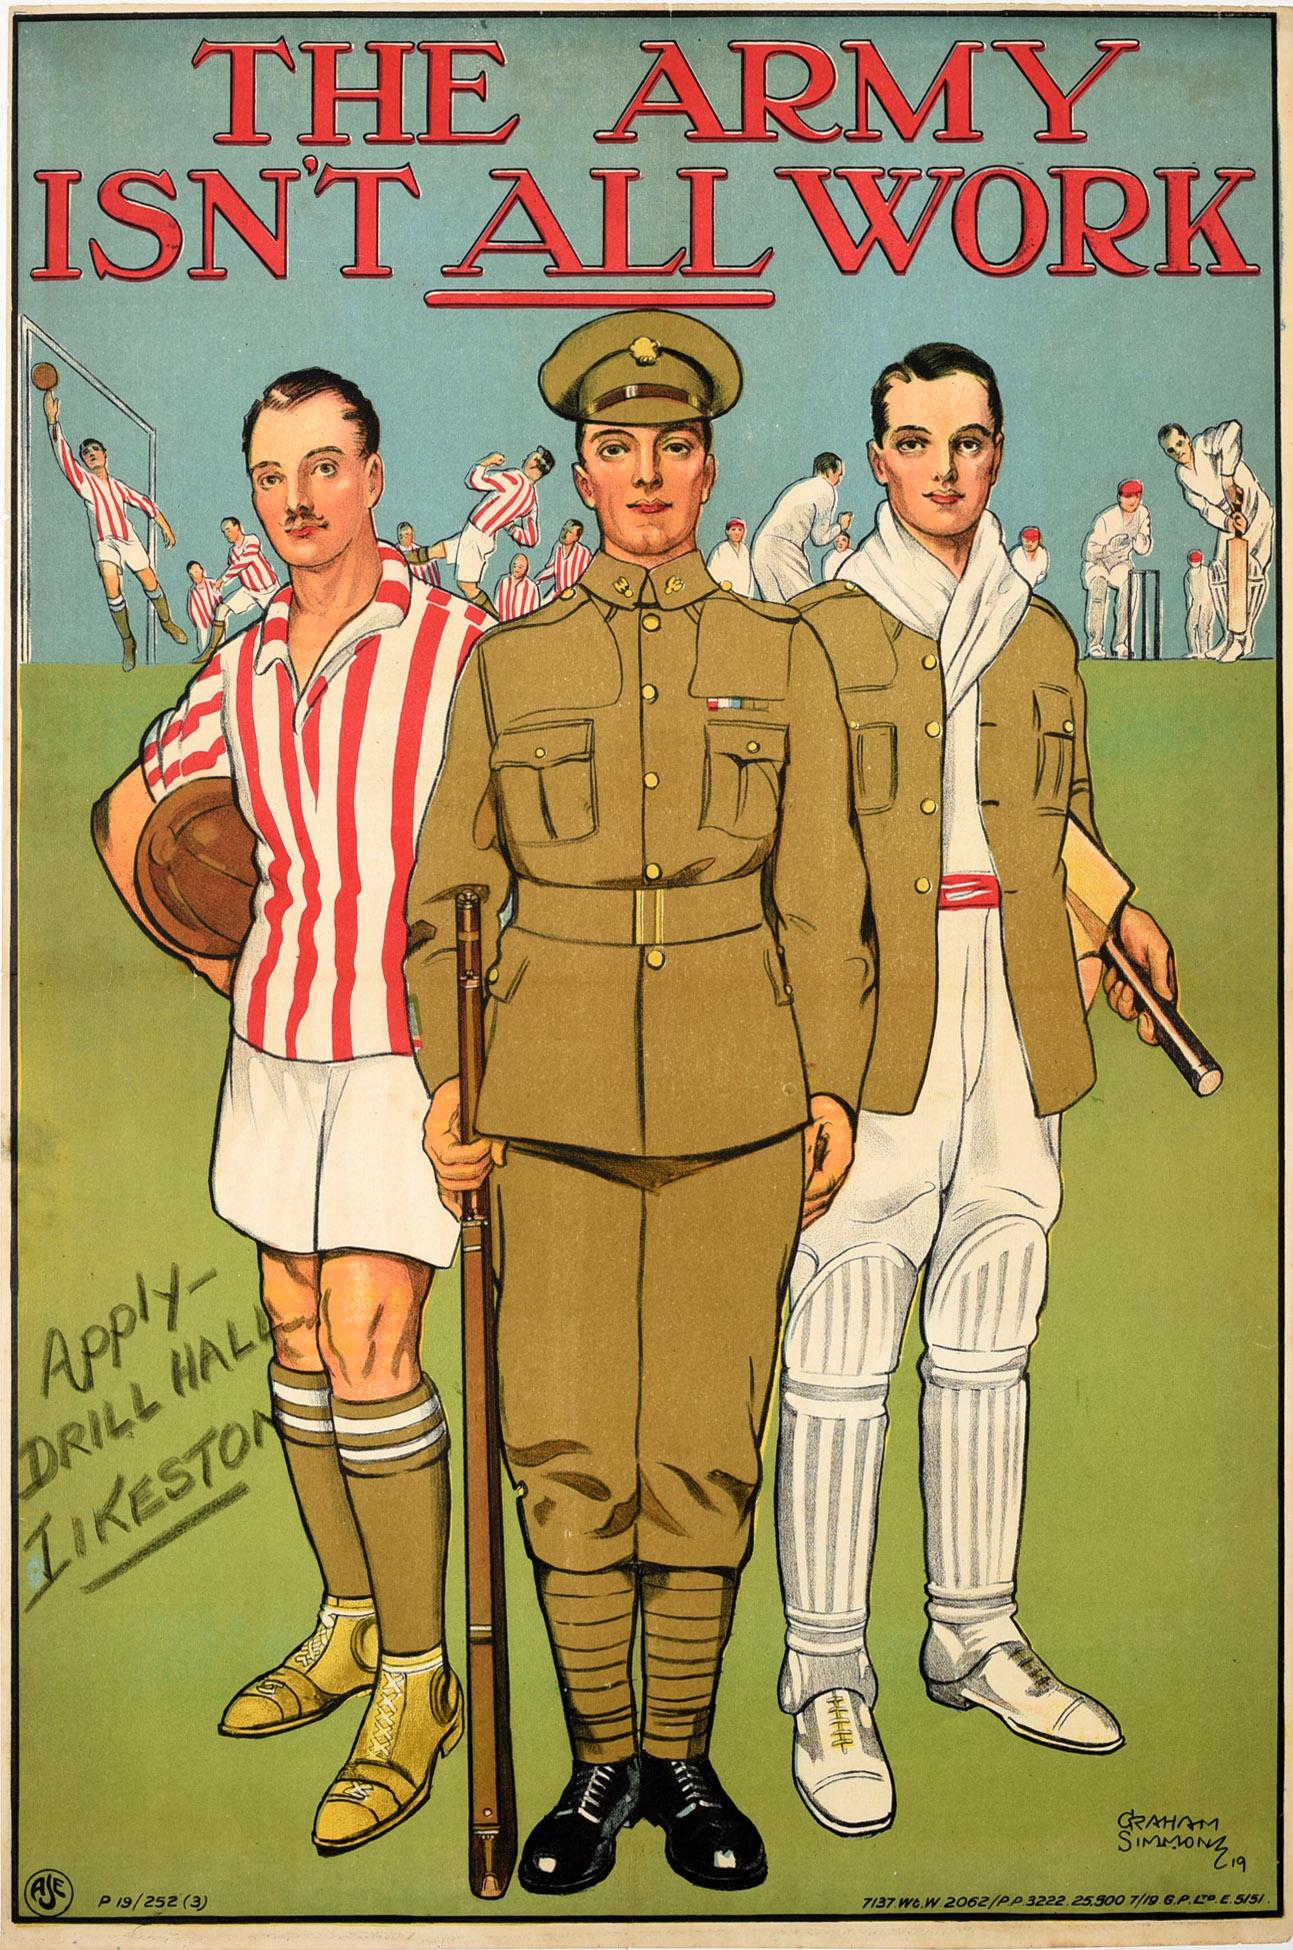 Graham Simmons Print - Original Antique Recruitment Poster - The Army Isn't All Work - Football Cricket